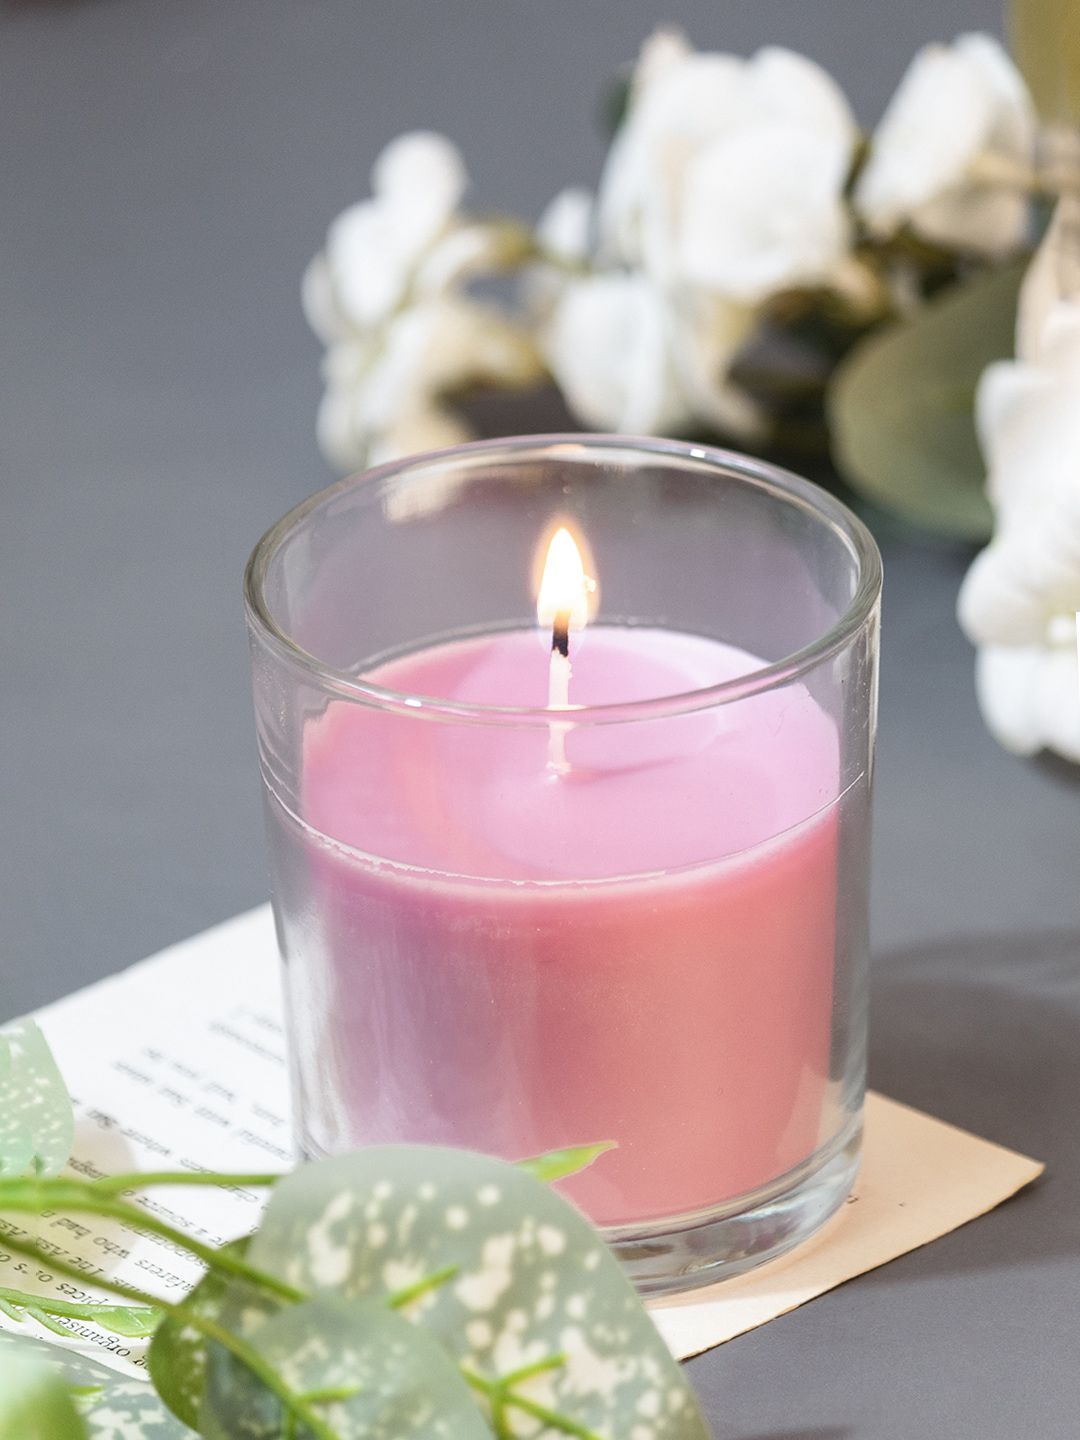 MARKET99 Pink Solid Strawberry Scented Candle Price in India